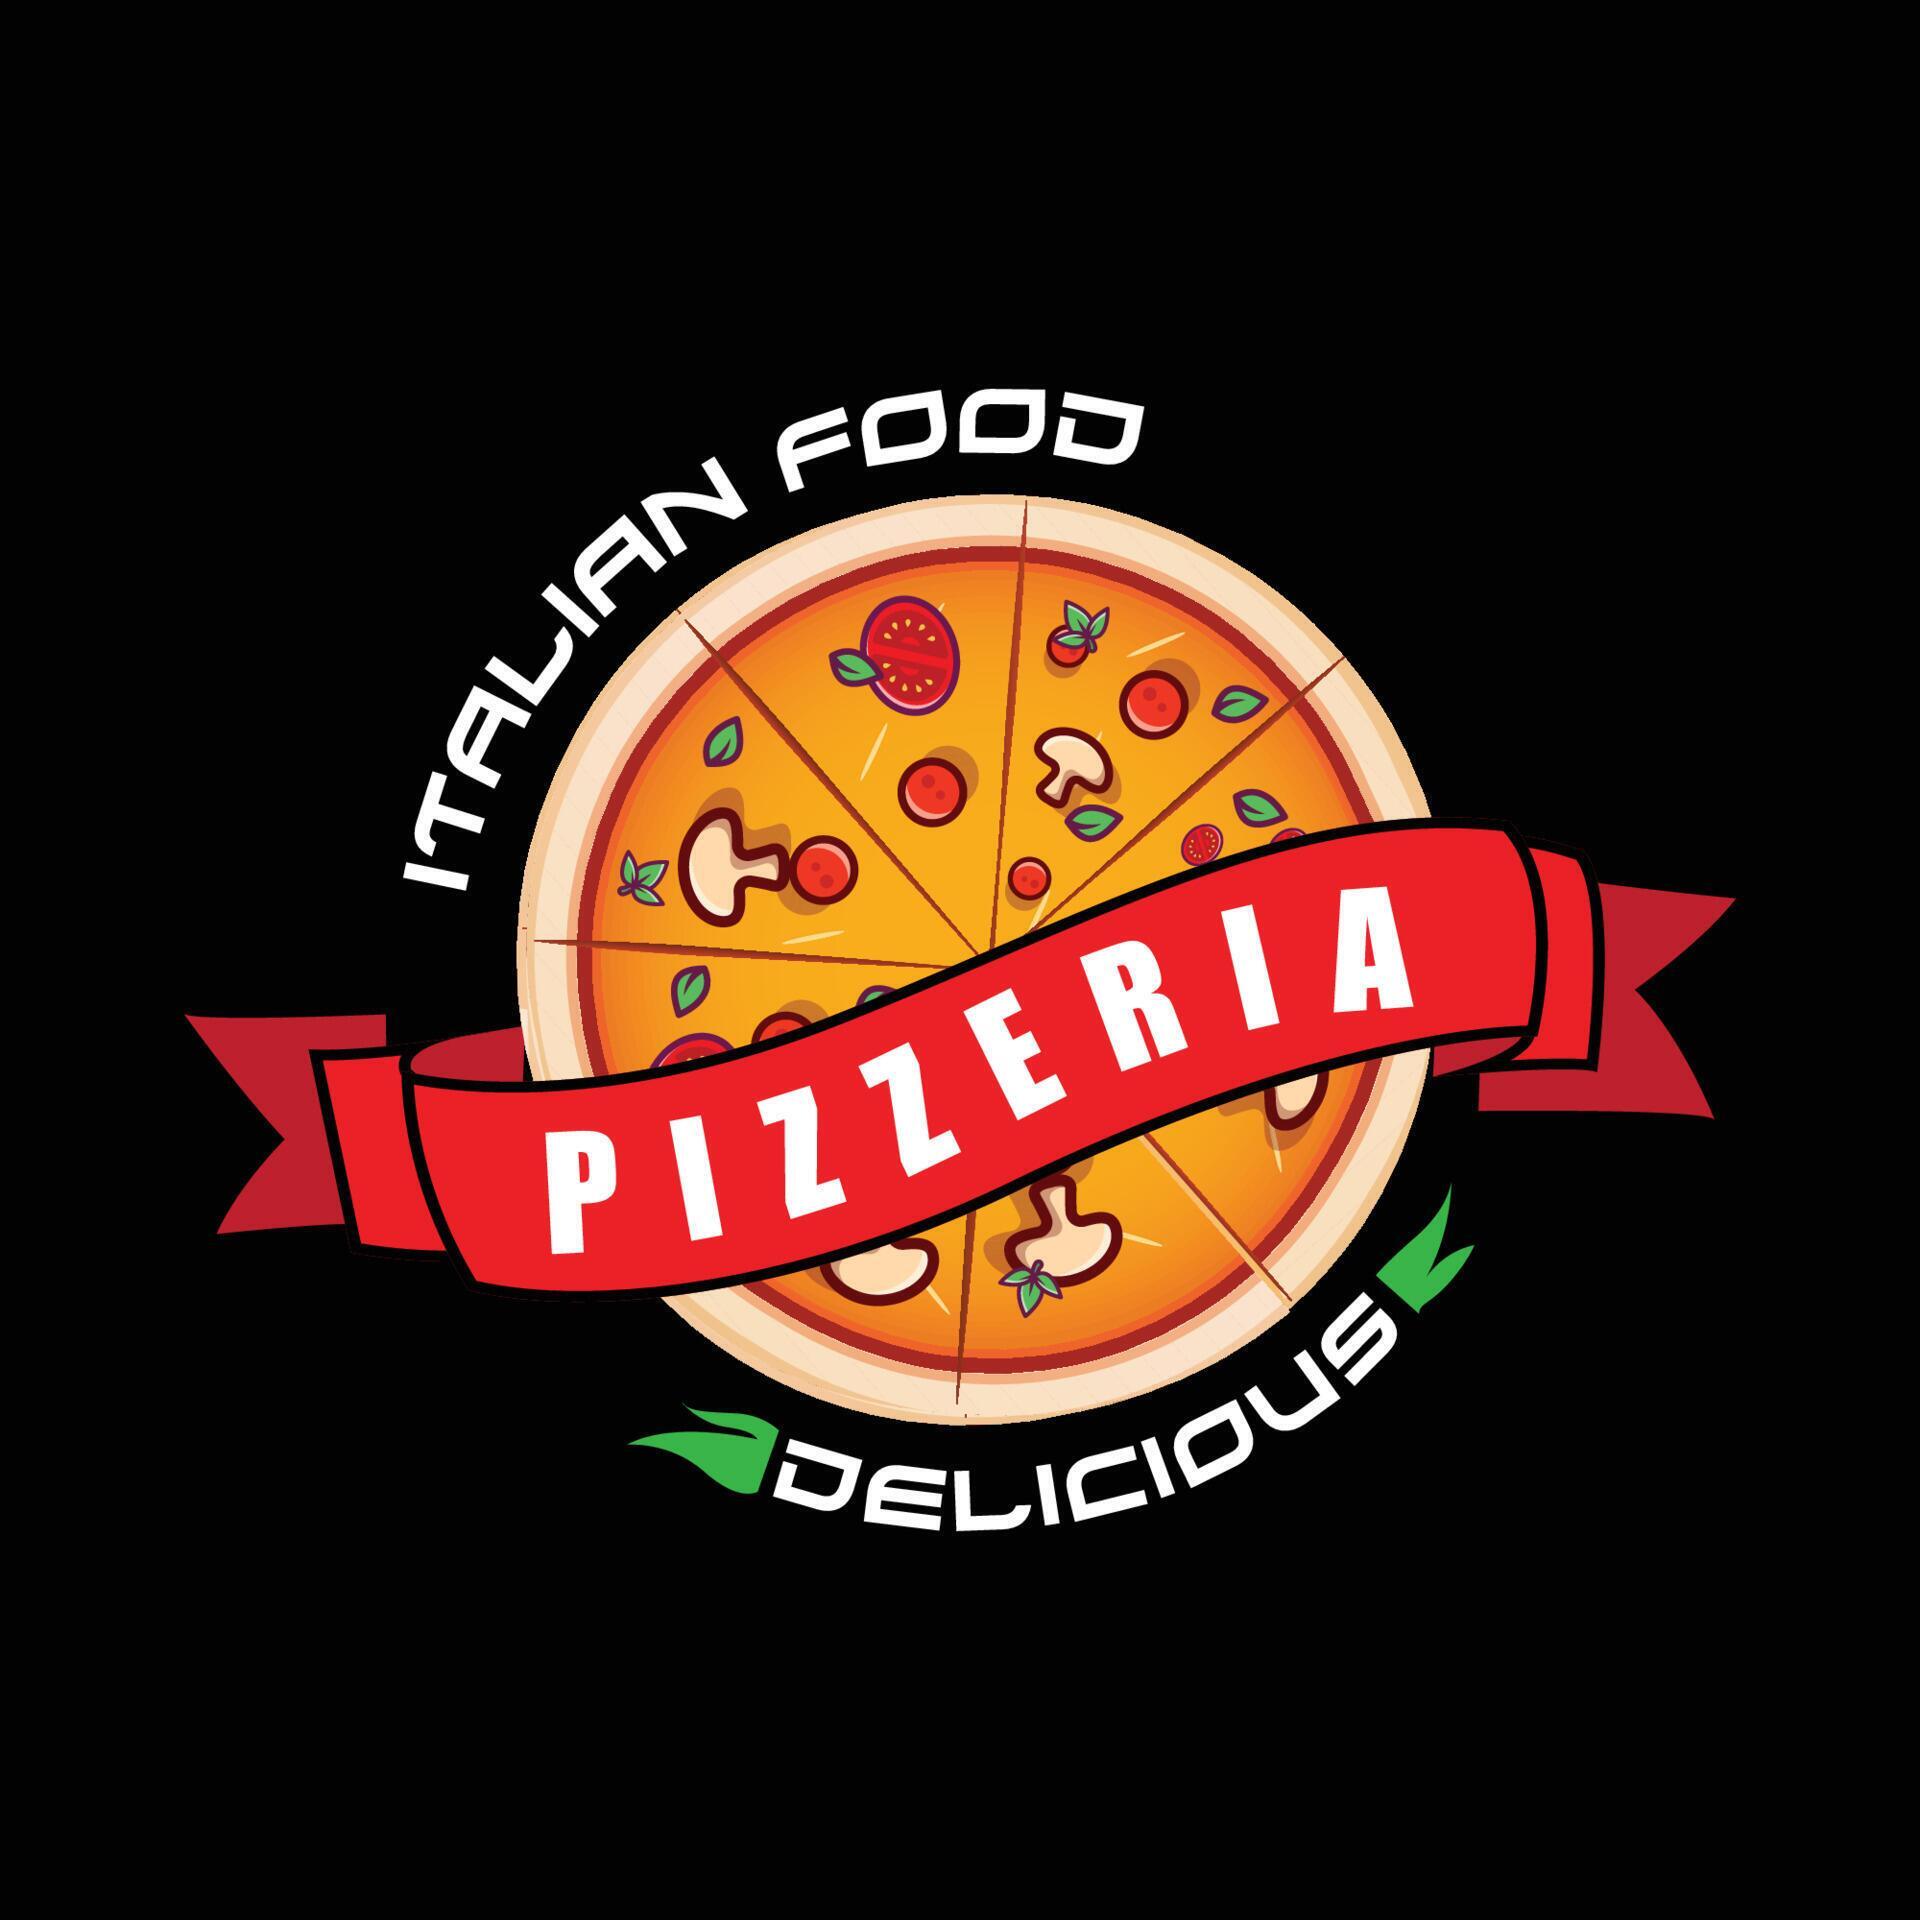 Pizza Food Logo Vector Design Originating From Italy, Made Of Wheat And ...